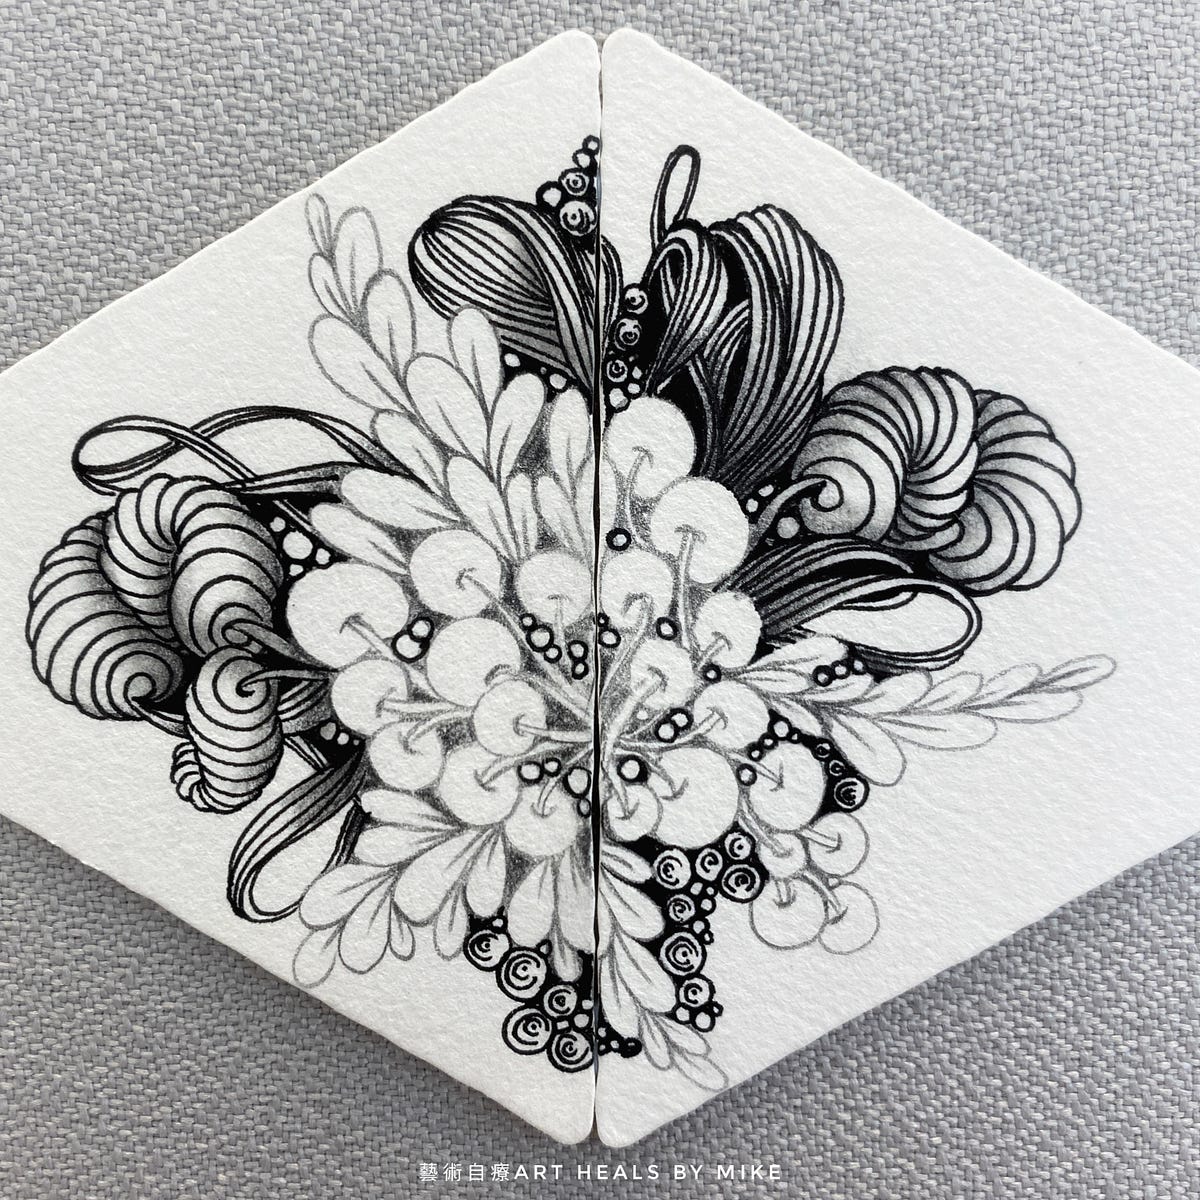 Zentangle The Meditative Art — Art Supplies Suggestions and More